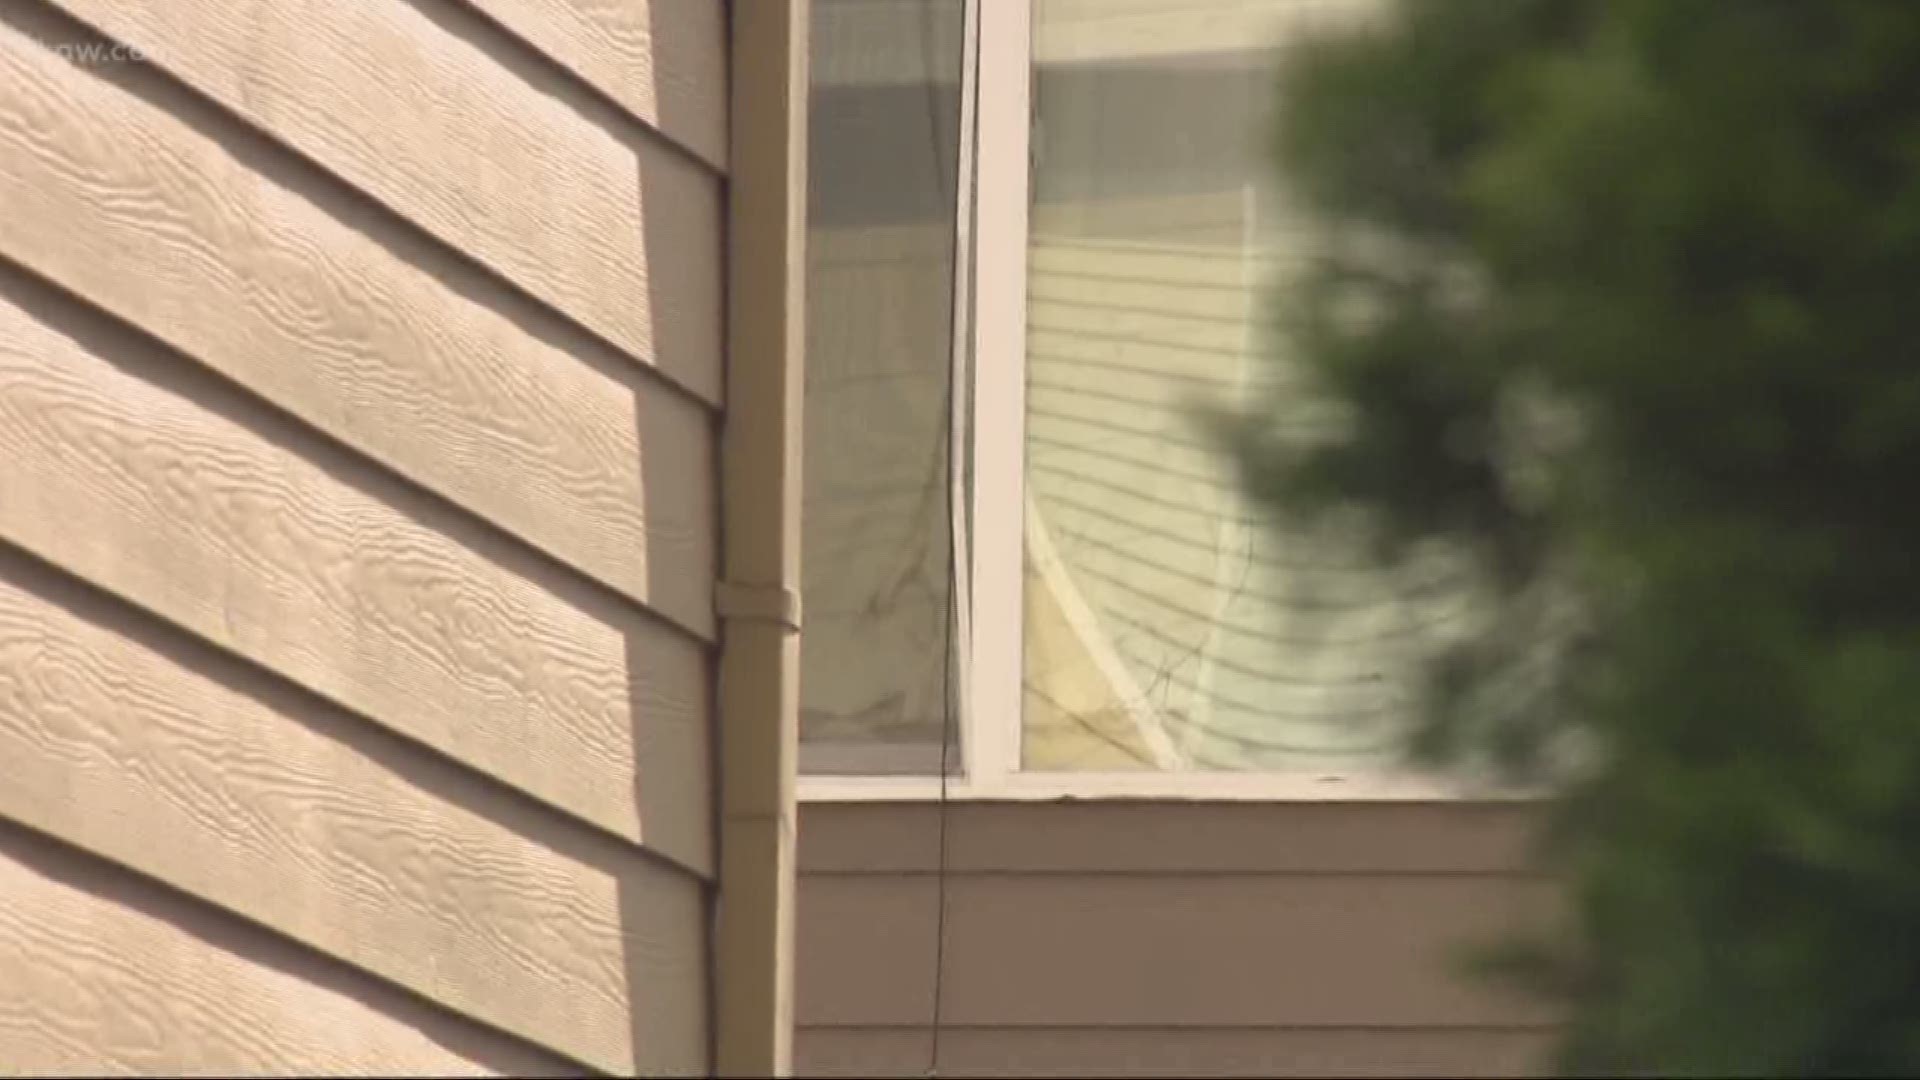 A 3-year-old boy fell out of a second-story window and landed on a concrete patio at a Hillsboro home Wednesday afternoon.